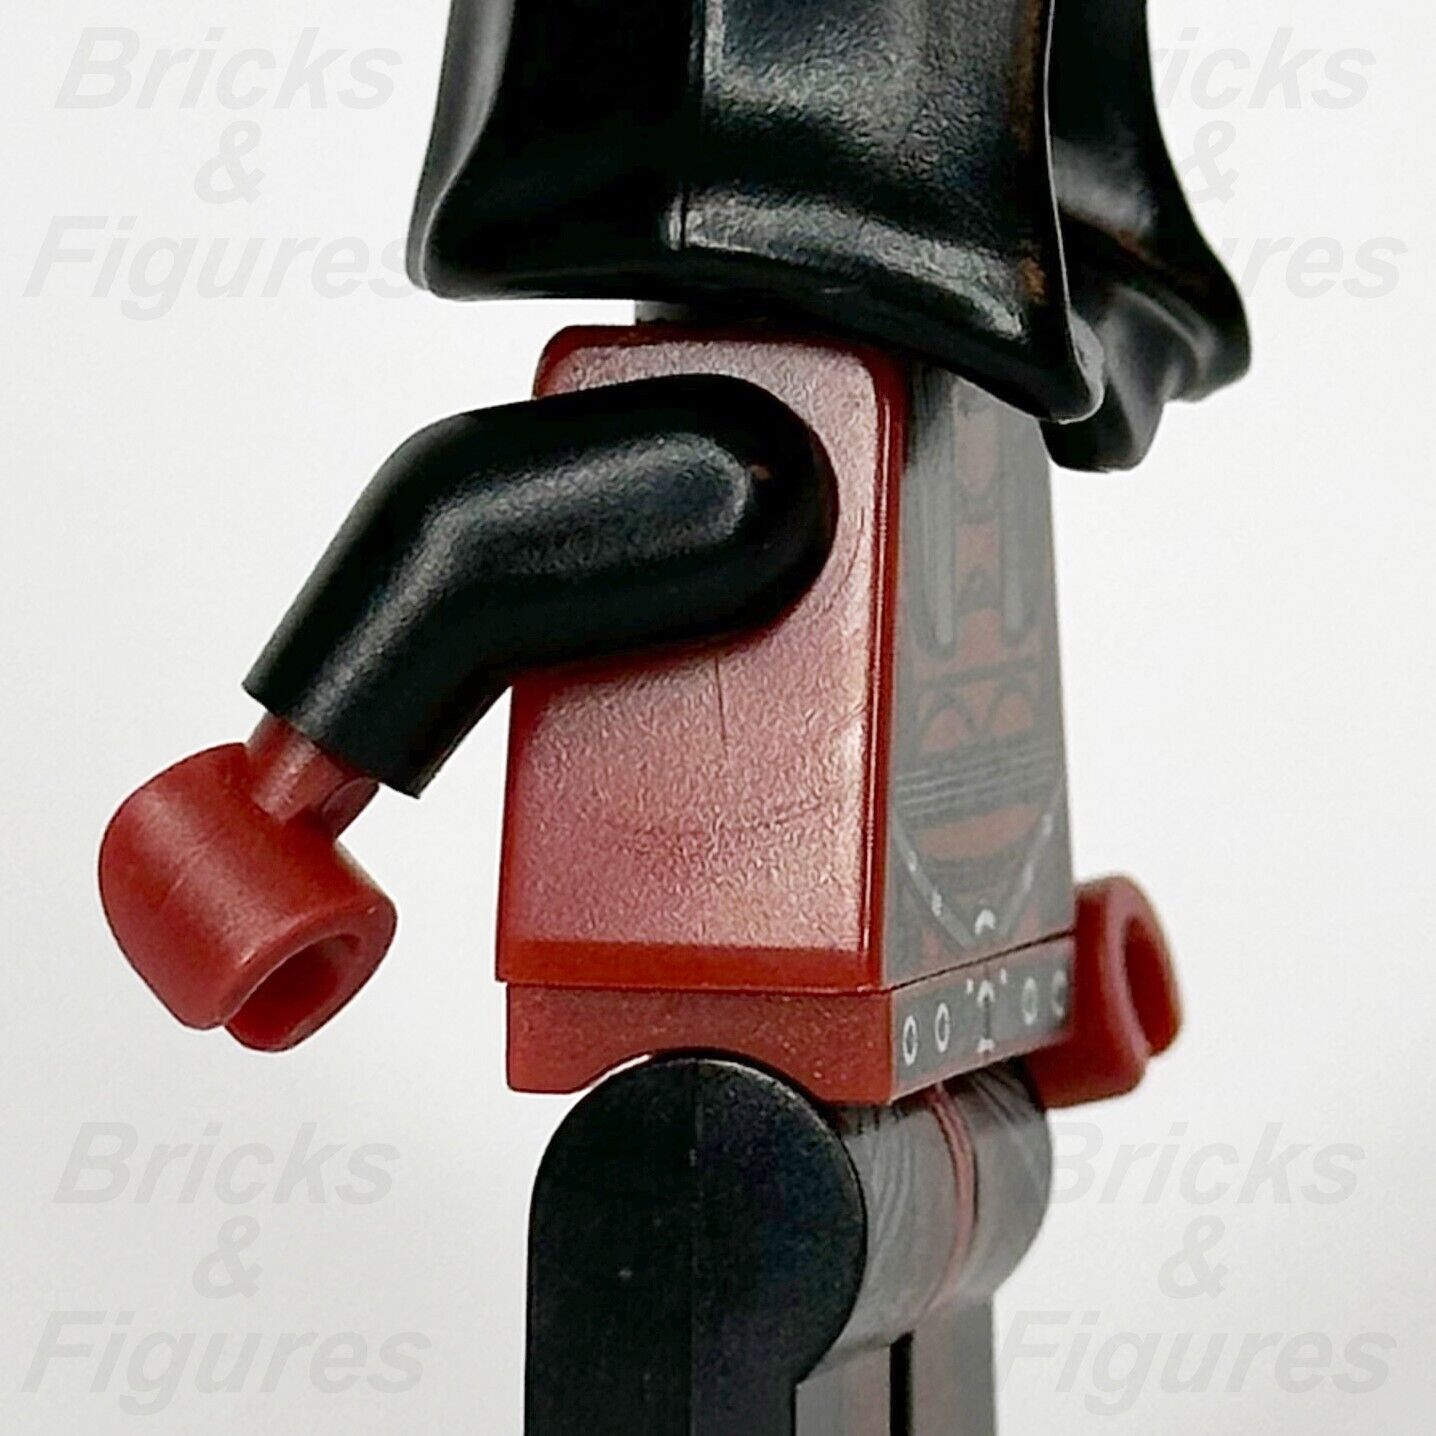 LEGO Star Wars Darth Revan Minifigure Knights of the Old Republic Sith sw0547